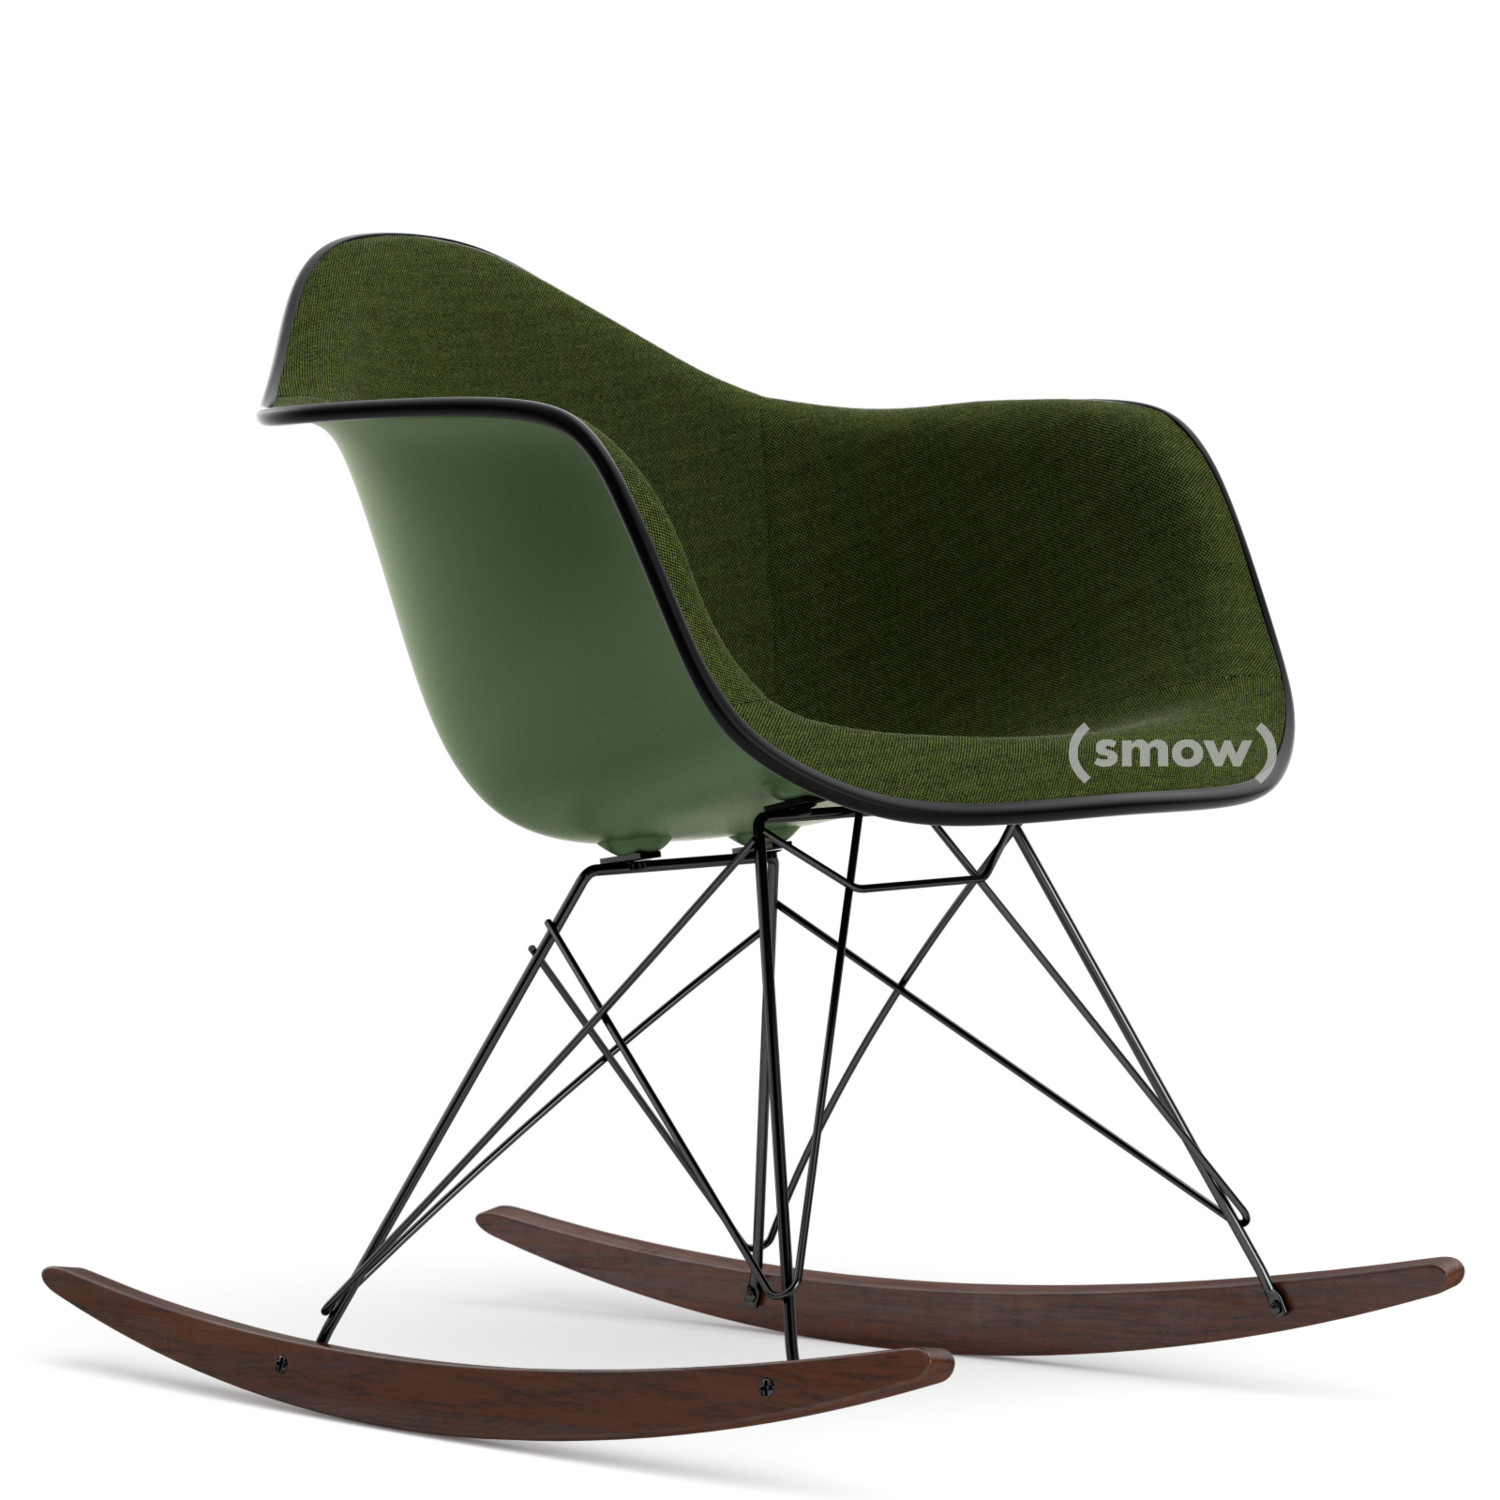 Vitra Rar With Upholstery Forest With Full Upholstery Nero Forest Black Basic Dark Dark Maple By Charles Ray Eames 1950 Designer Furniture By Smow Com